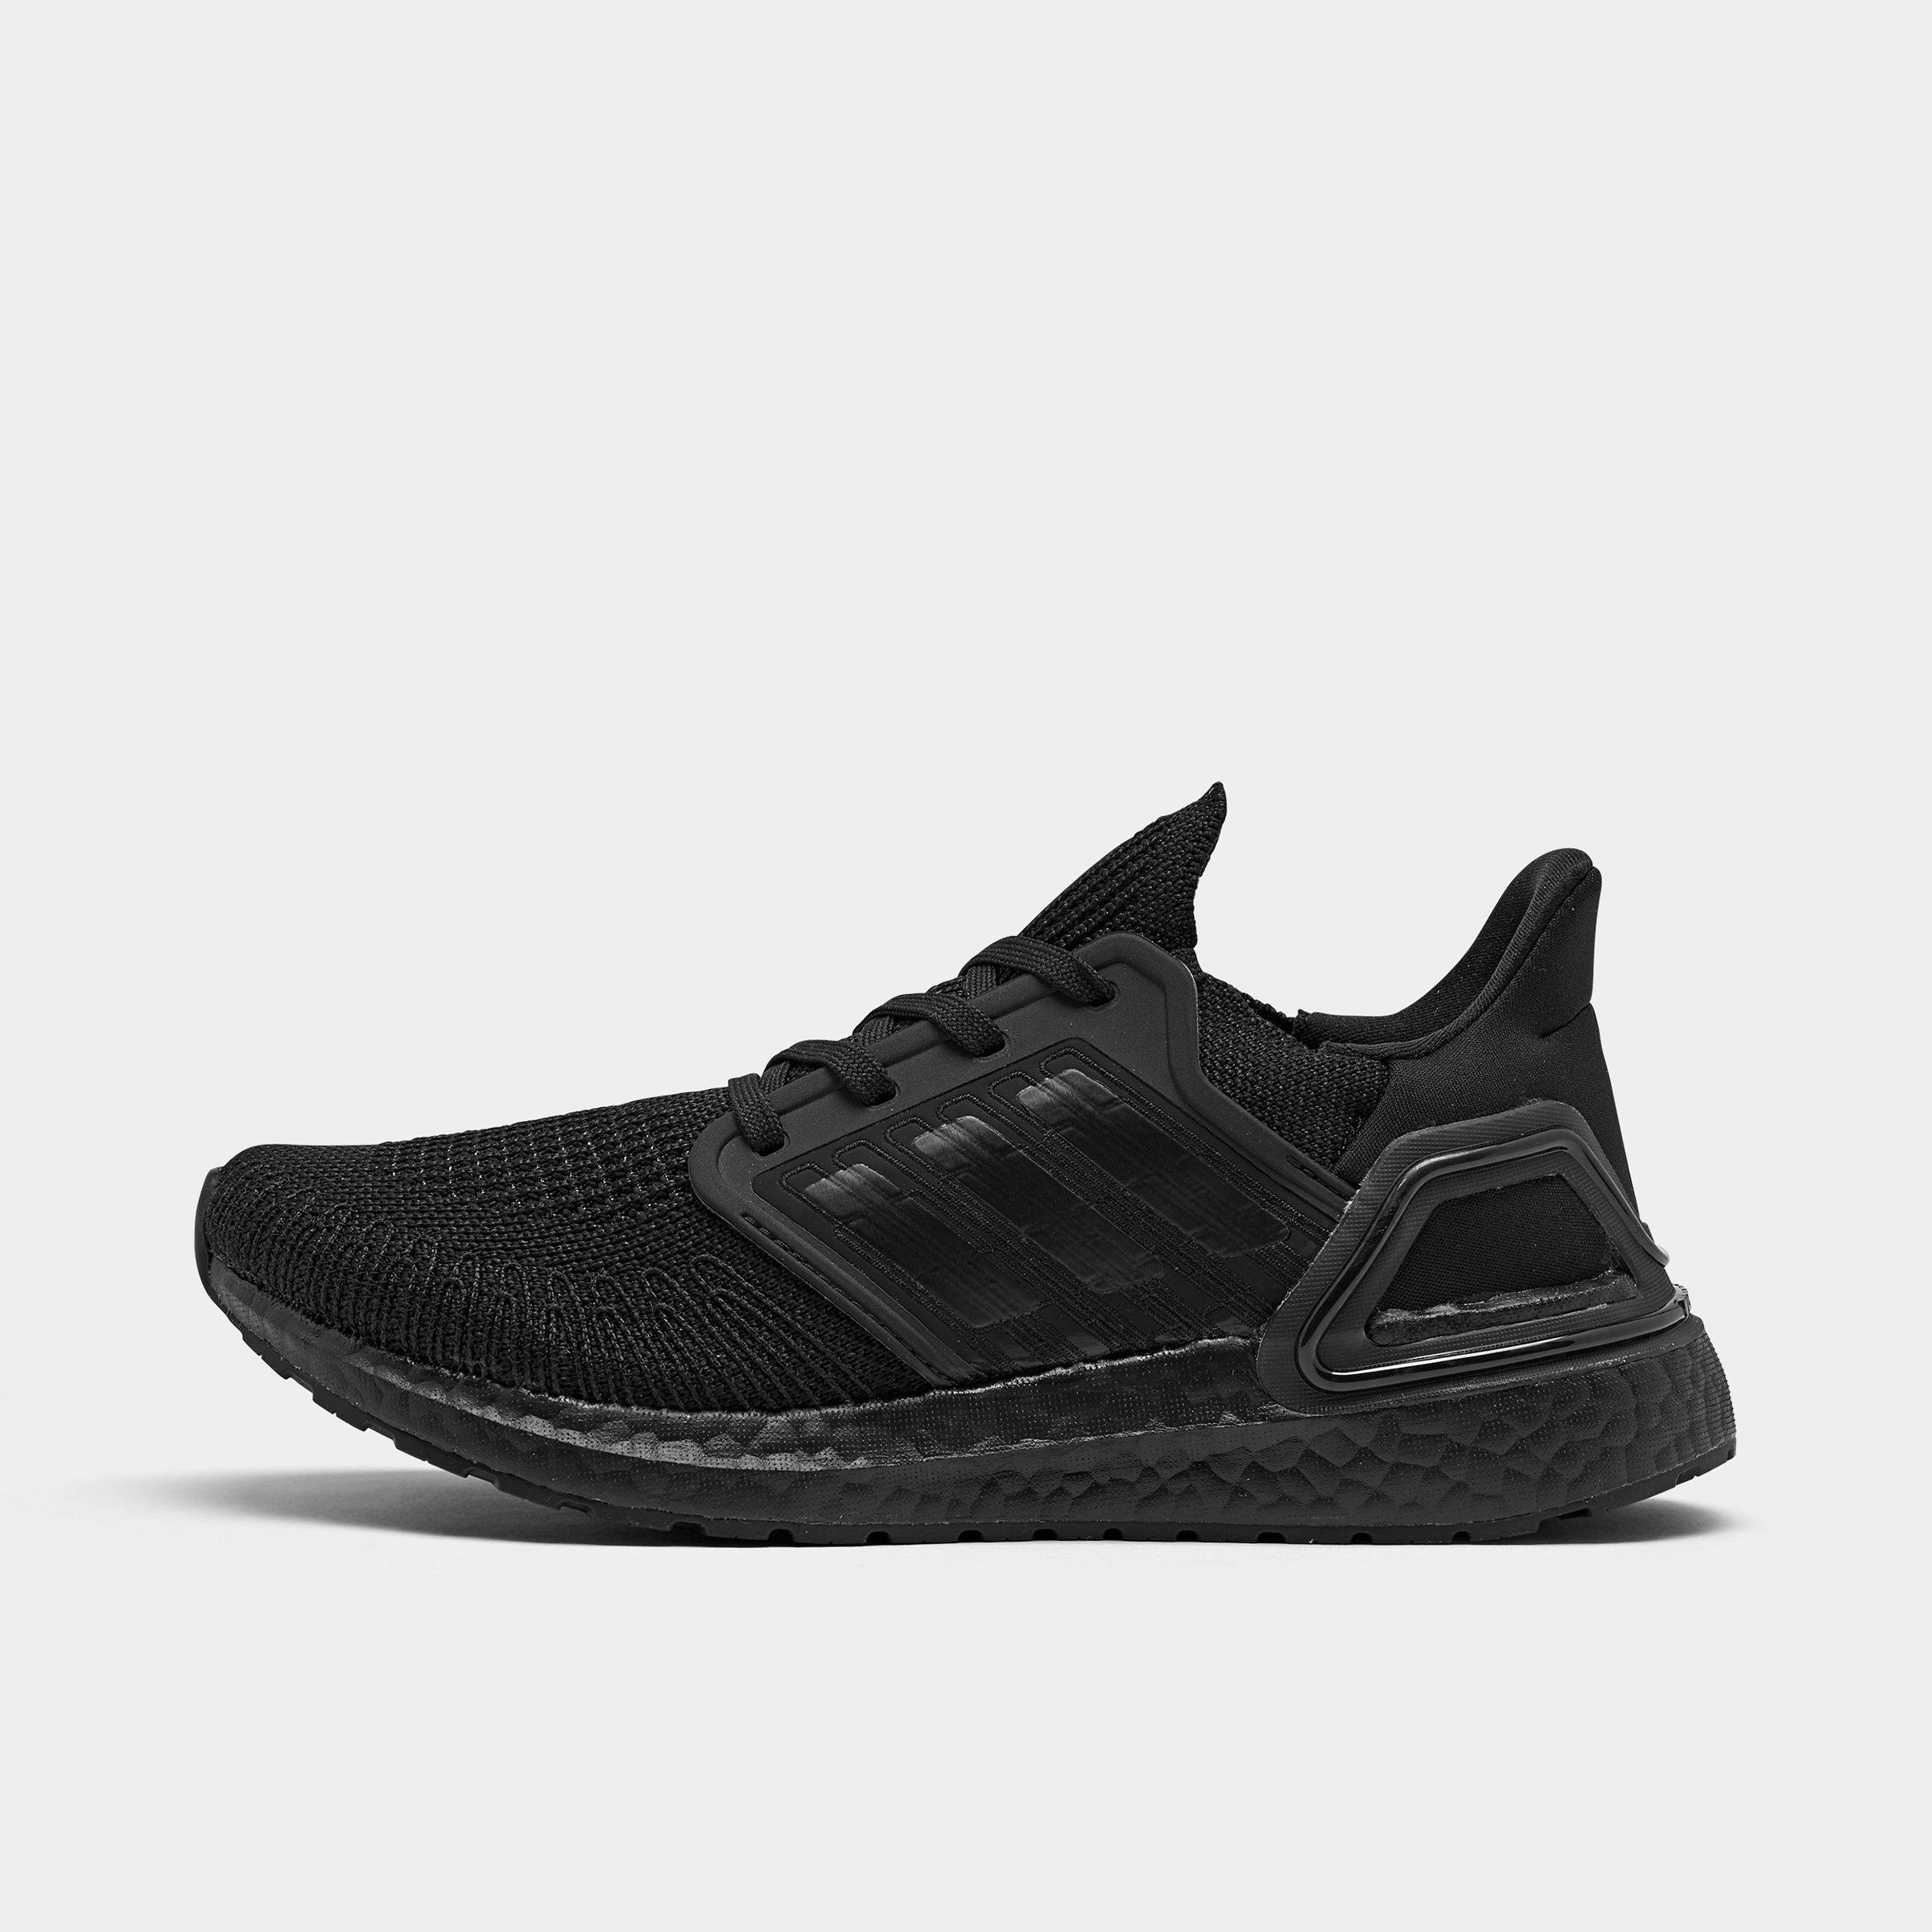 adidas air boost,Save up to 15%,www.ilcascinone.com